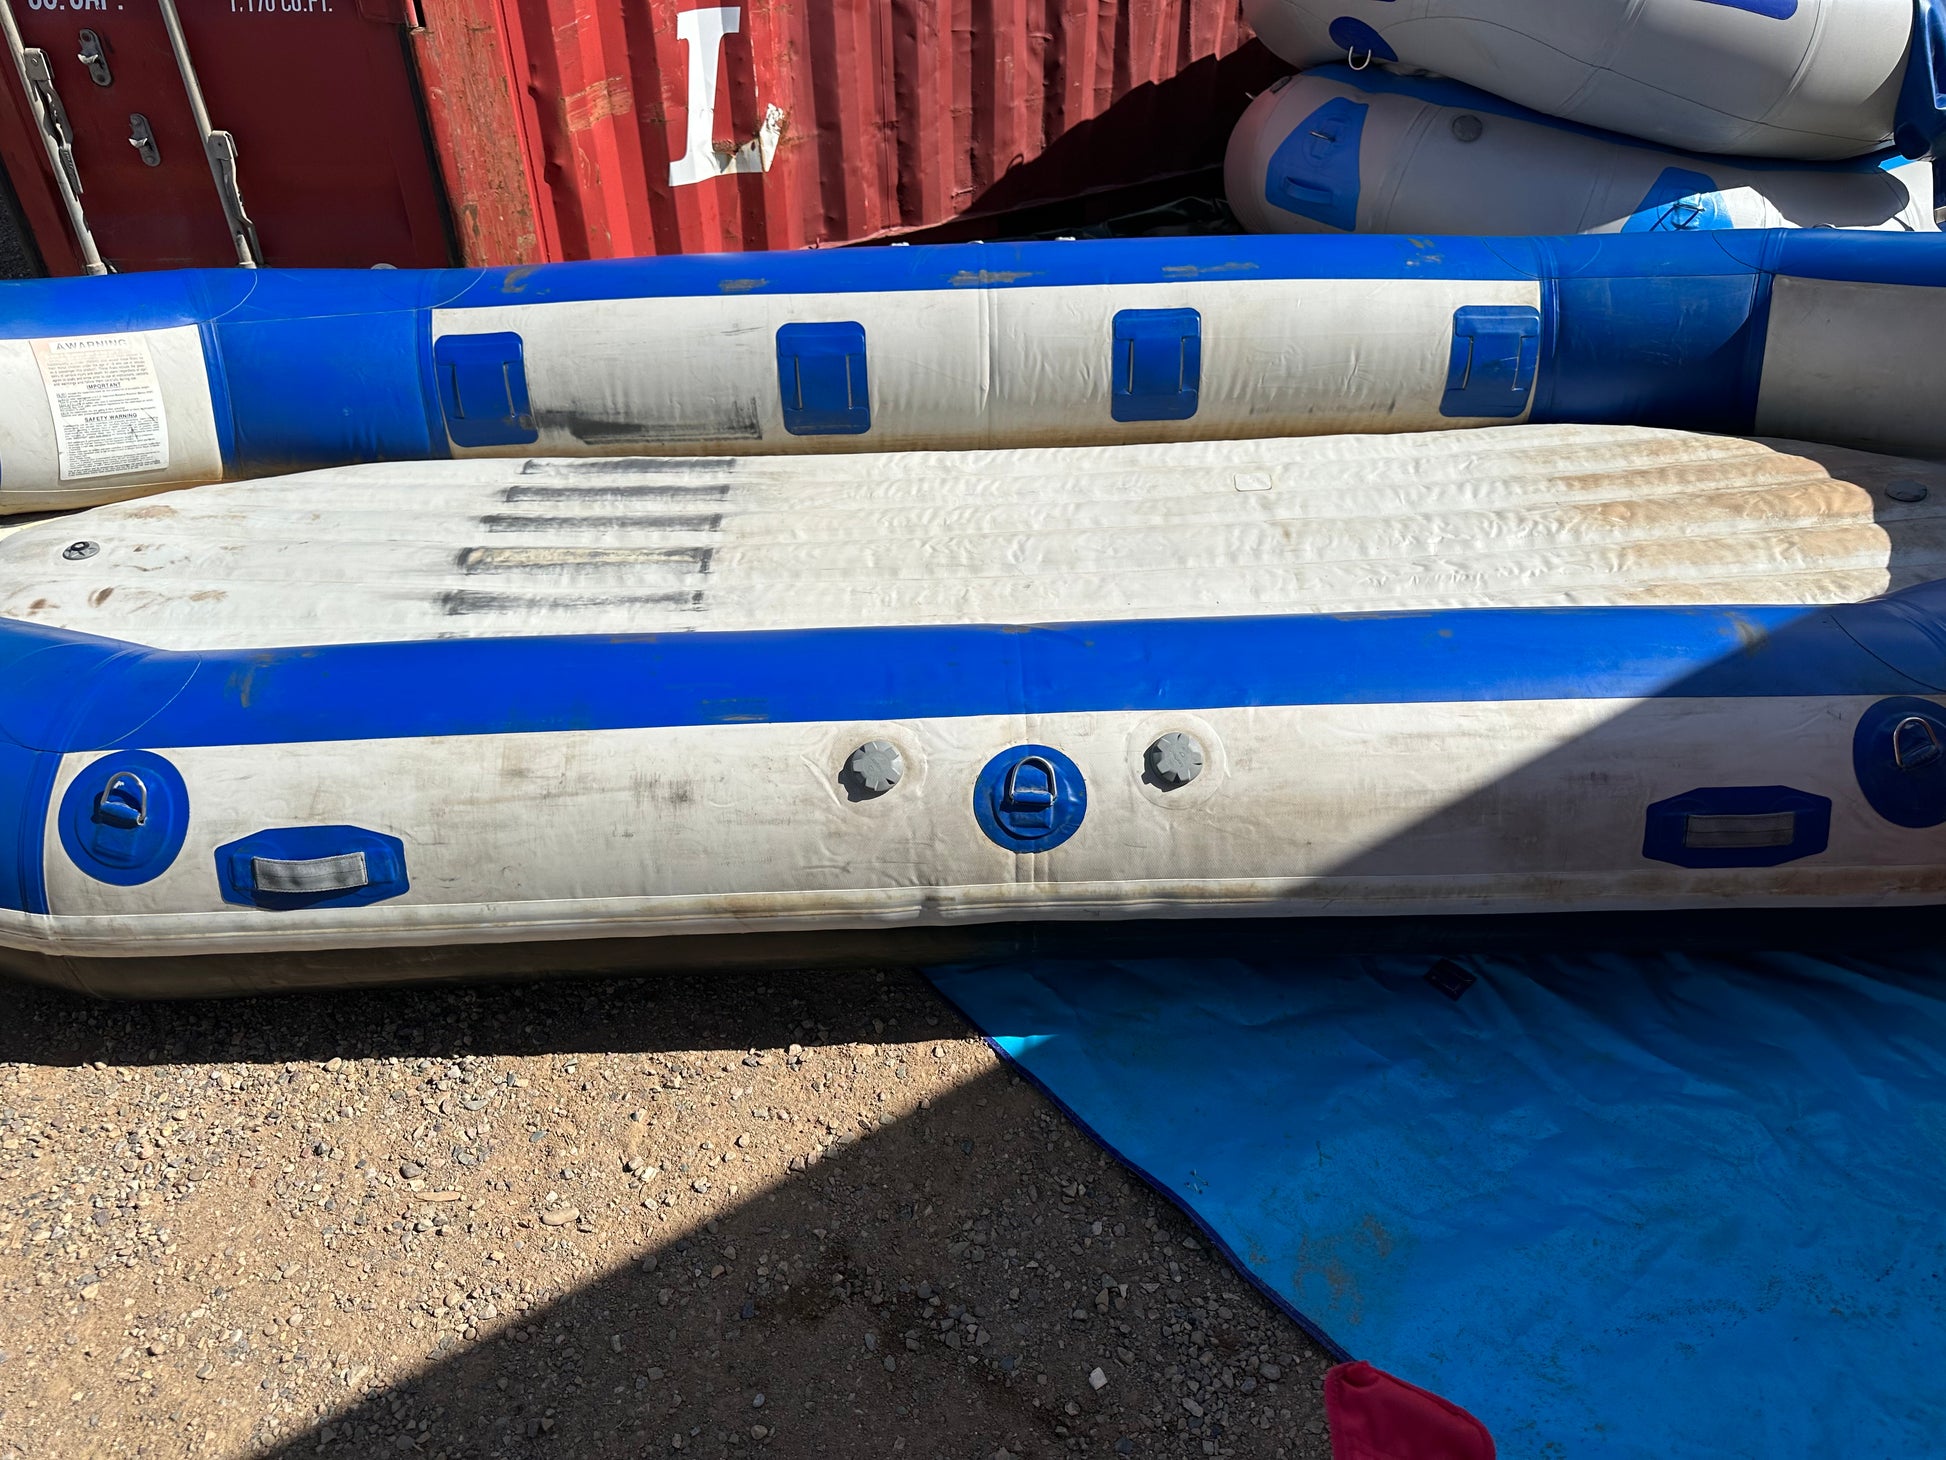 A fair condition Used 2006 16' Vanguard raft sitting on the ground, brand name 4CRS.